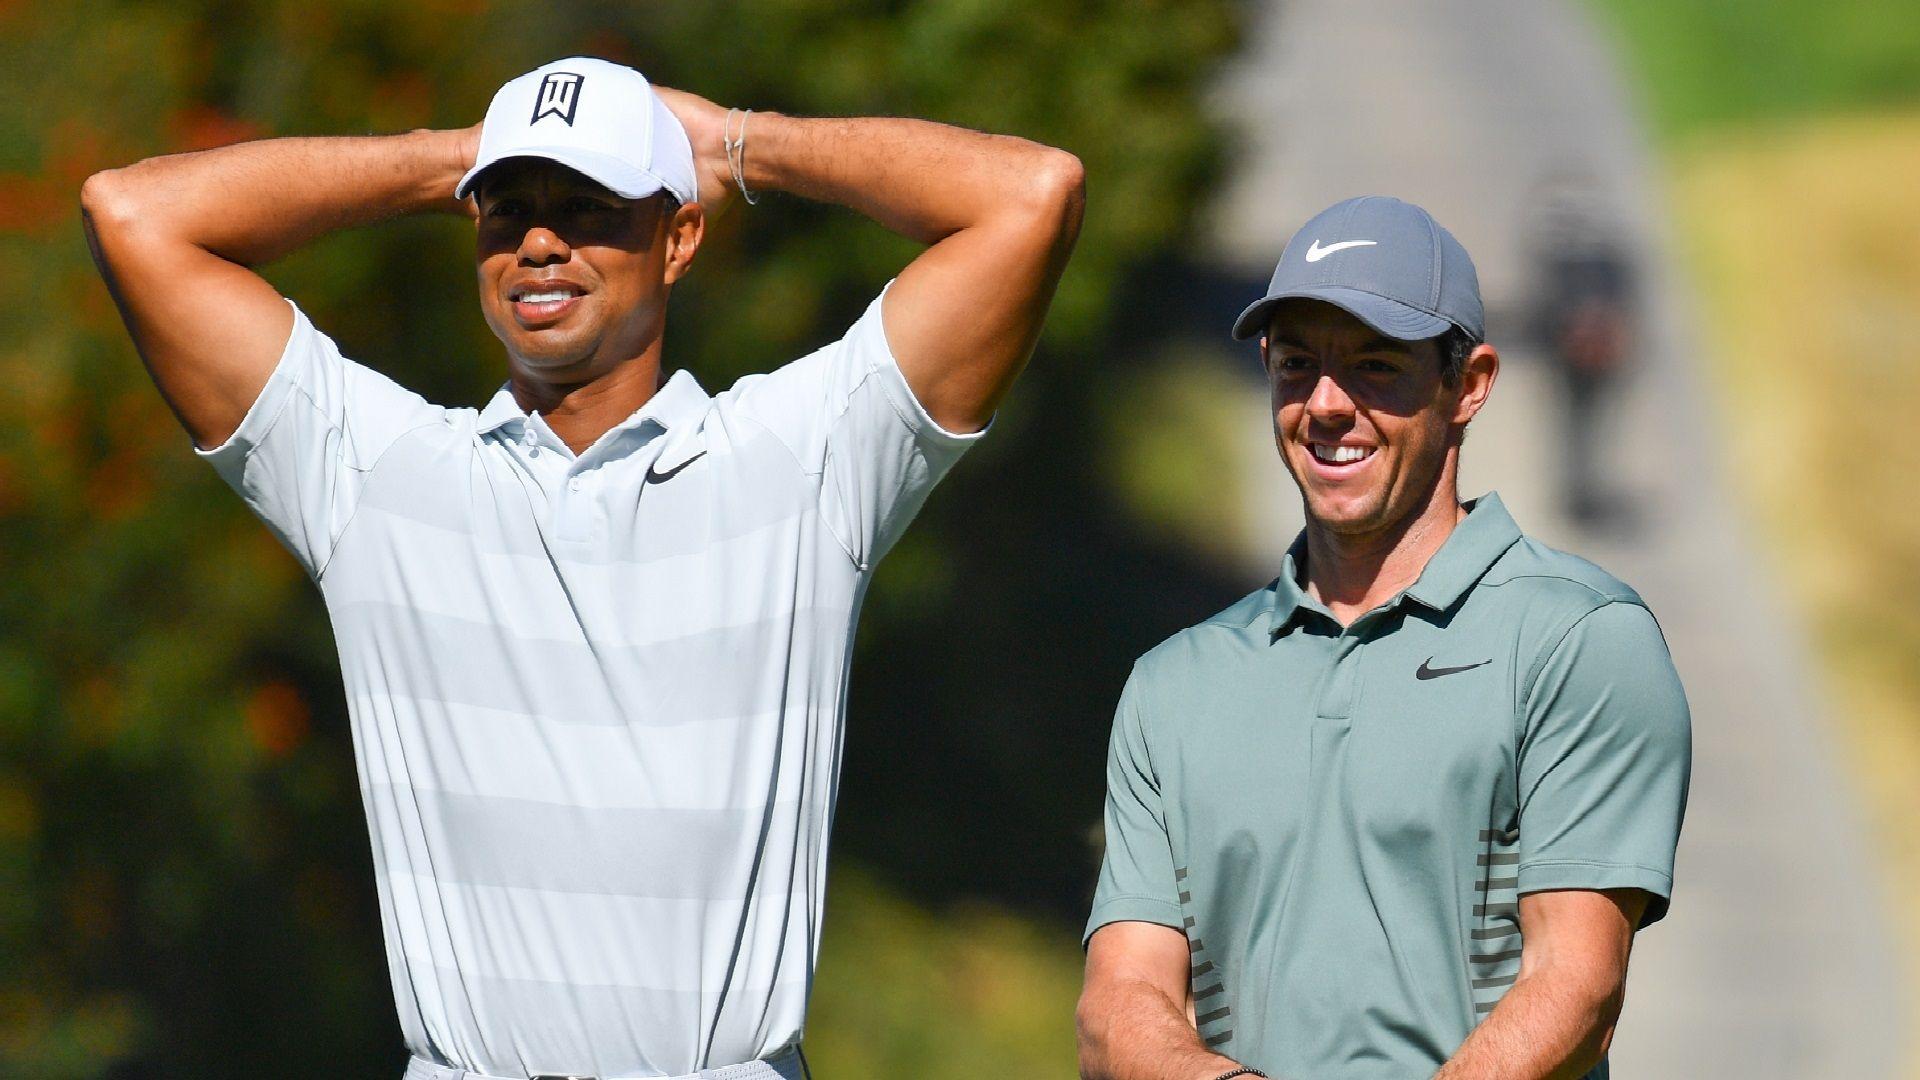 On the Clock: Expectations for Tiger Woods this week